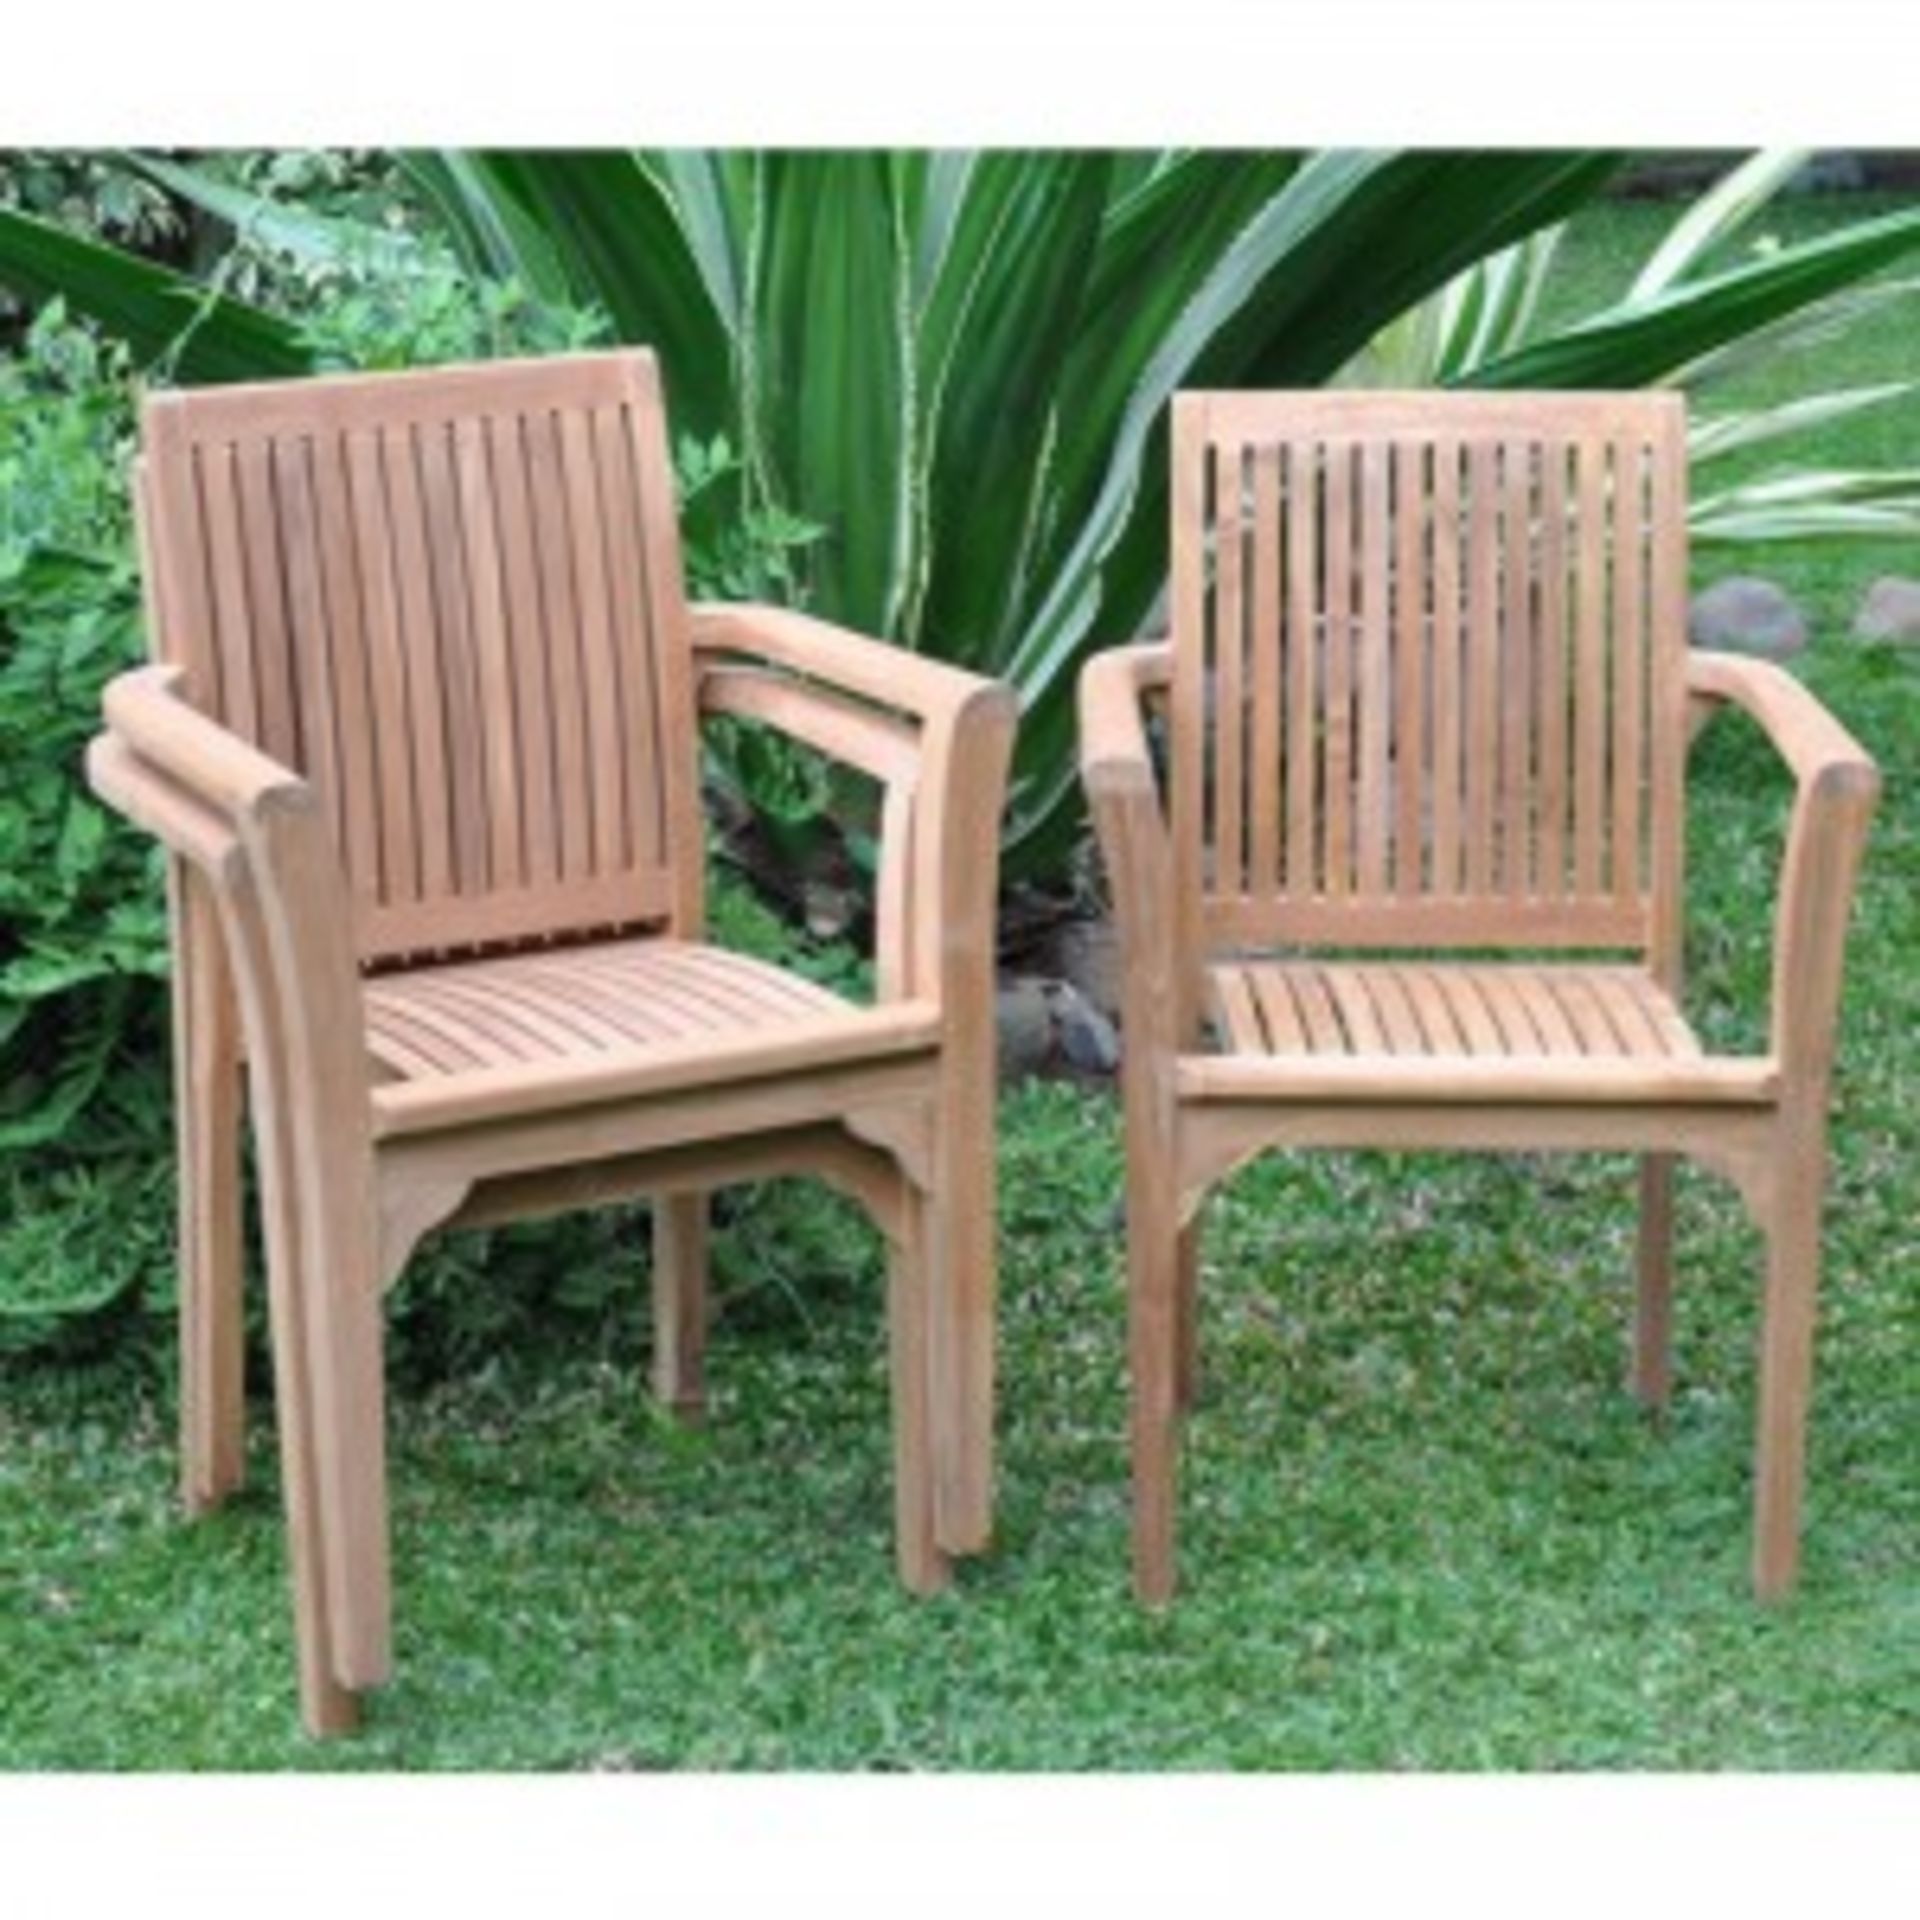 V Brand New TEAK Stacking Chair - Made From Grade A Plantation Teak RRP £199 NOTE: Item Is Available